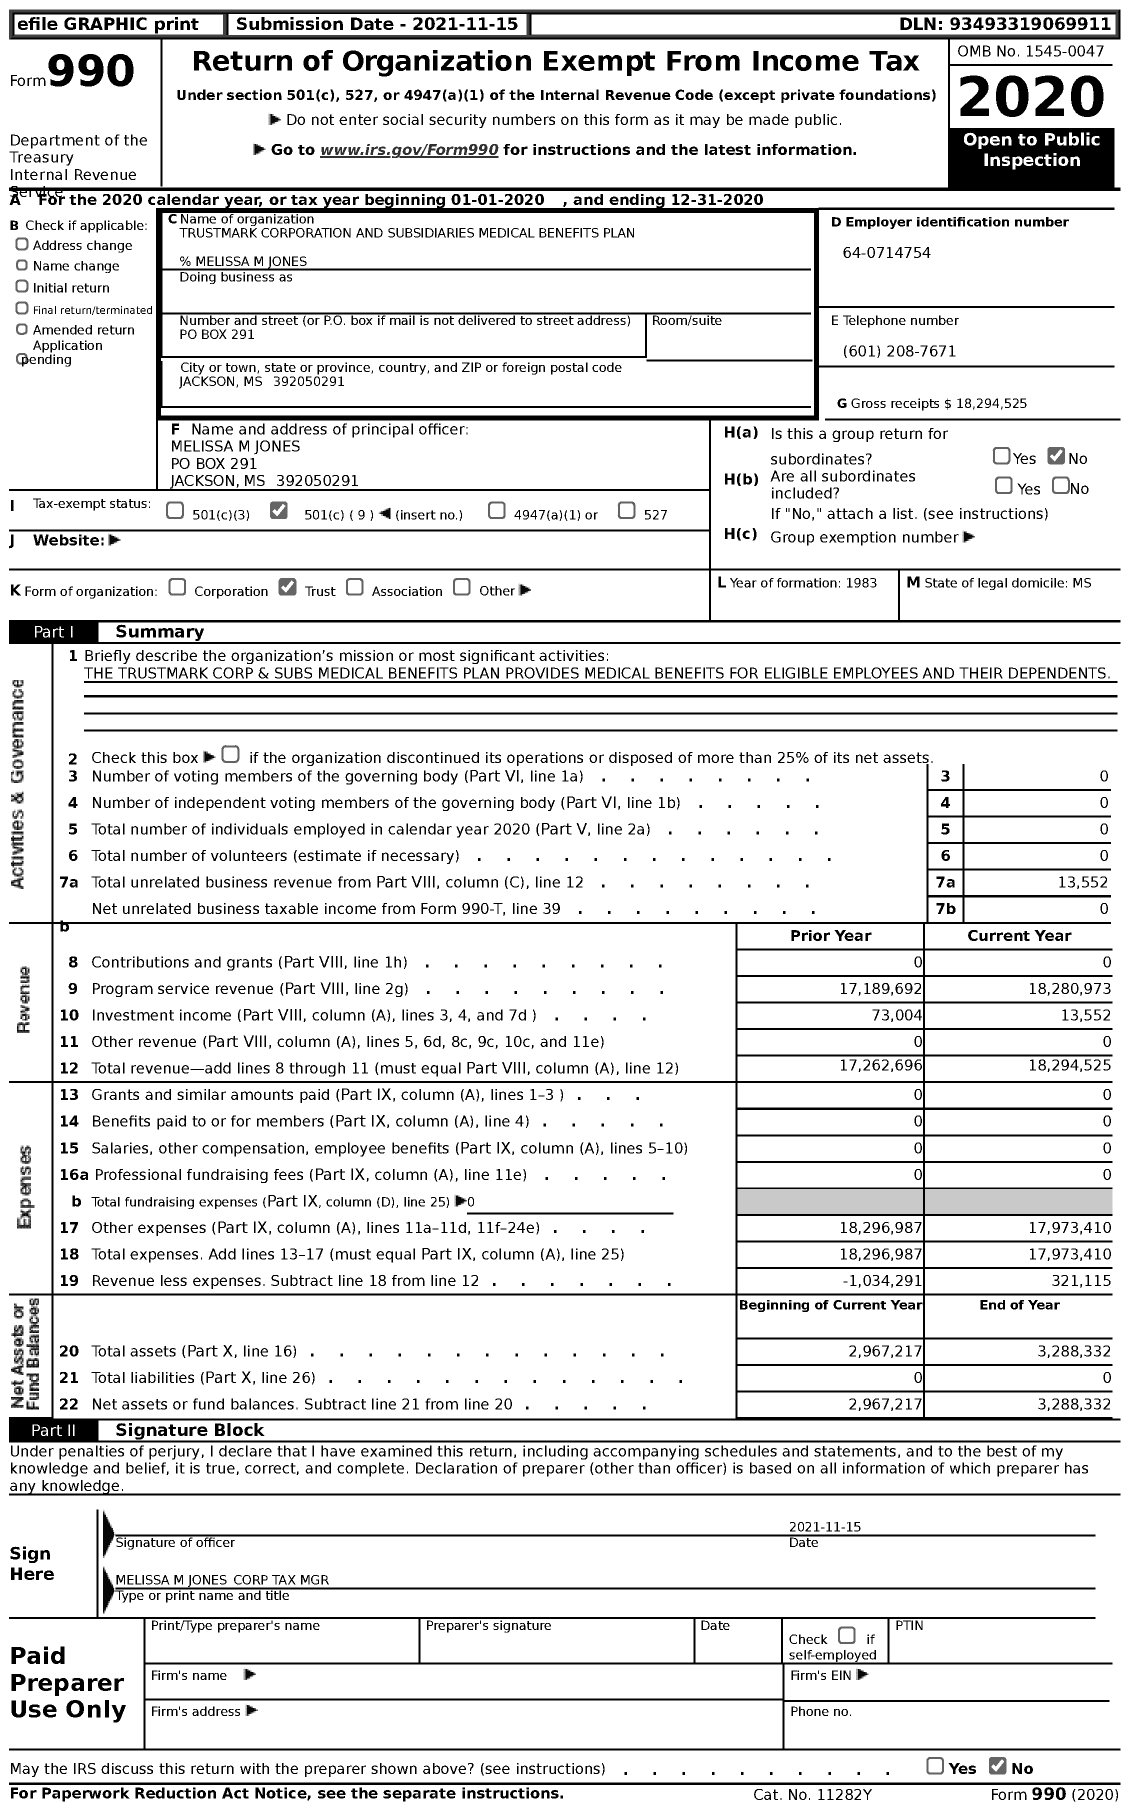 Image of first page of 2020 Form 990 for Trustmark Corp and Subs Medical Benefits Plan